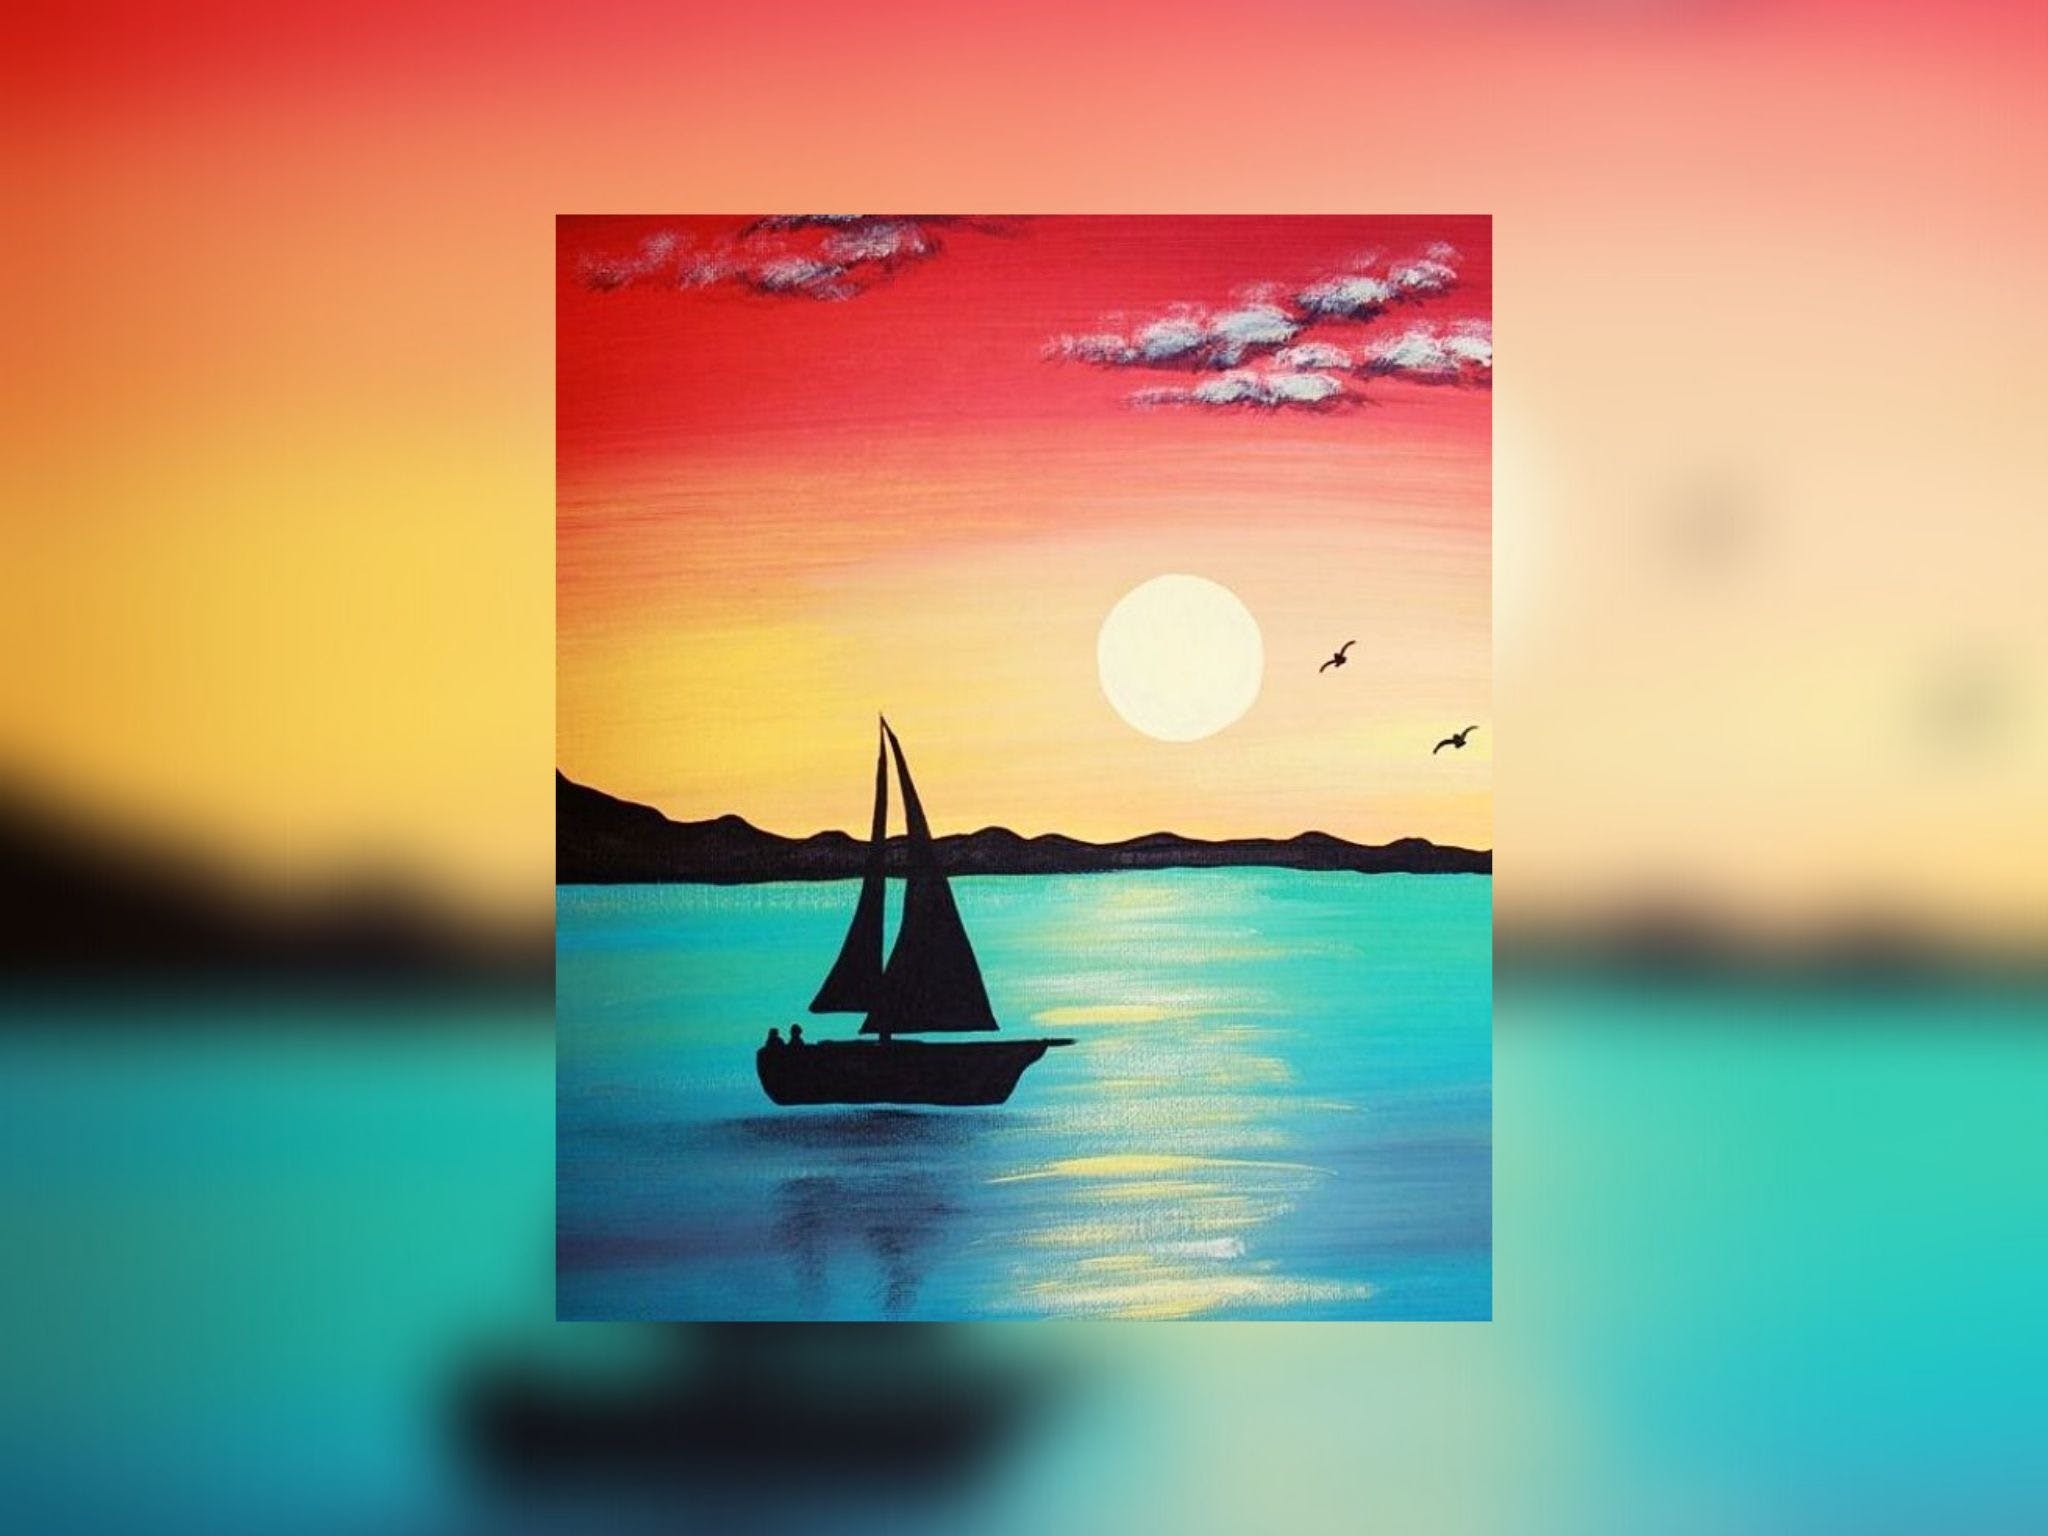 Grab a glass of wine and learn to paint 'Sailboat'